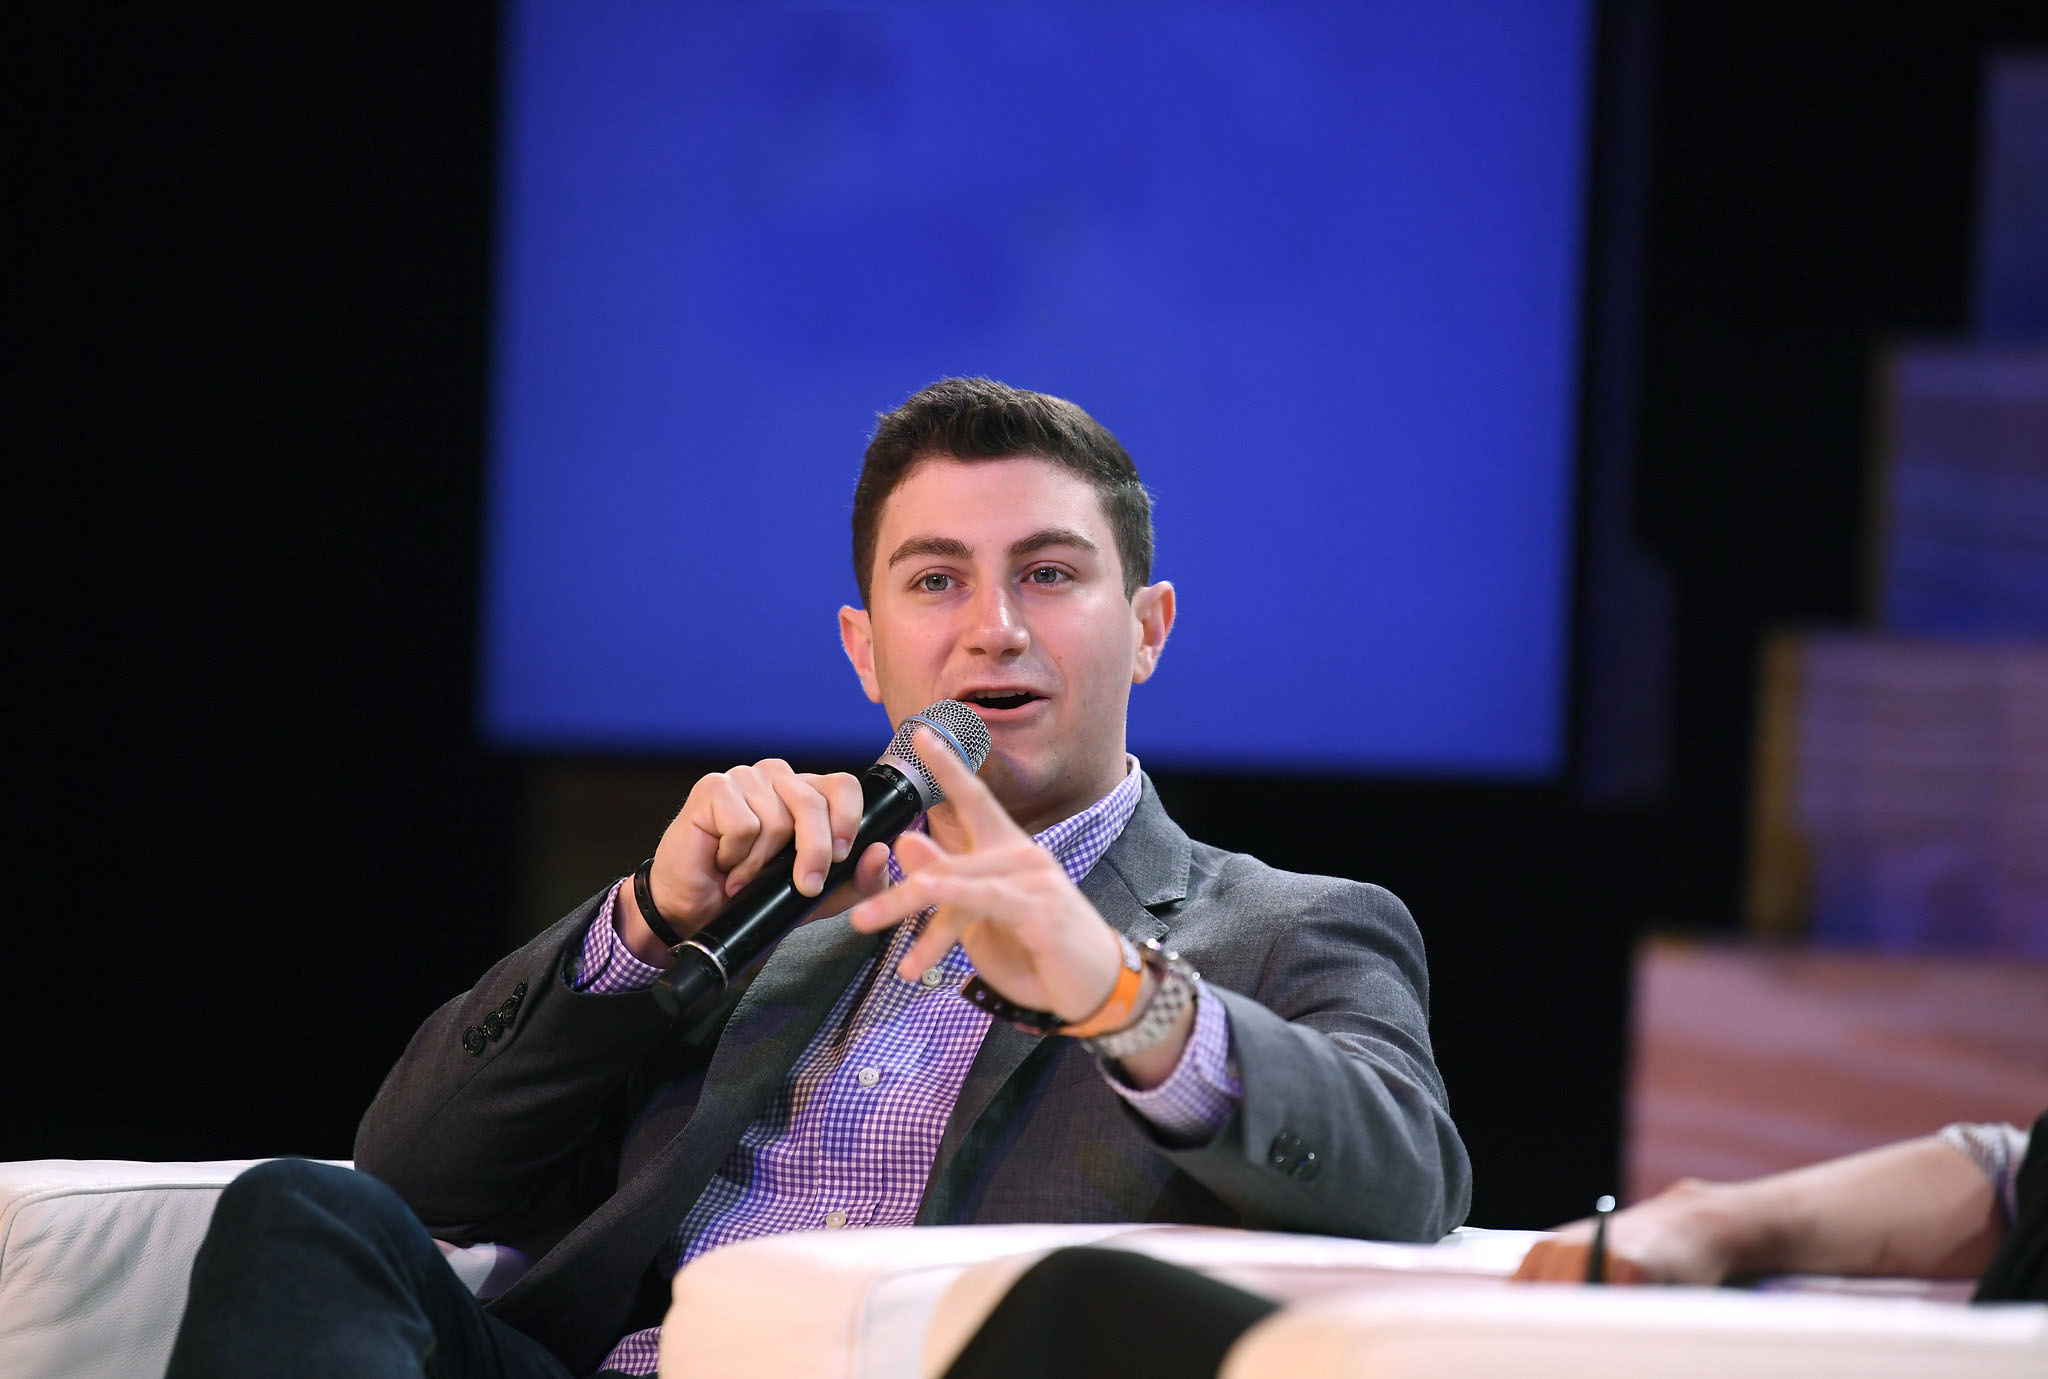 Joe Fasone, Founder & CEO, Pilot, on the Growth Summit stage during day three of Collision